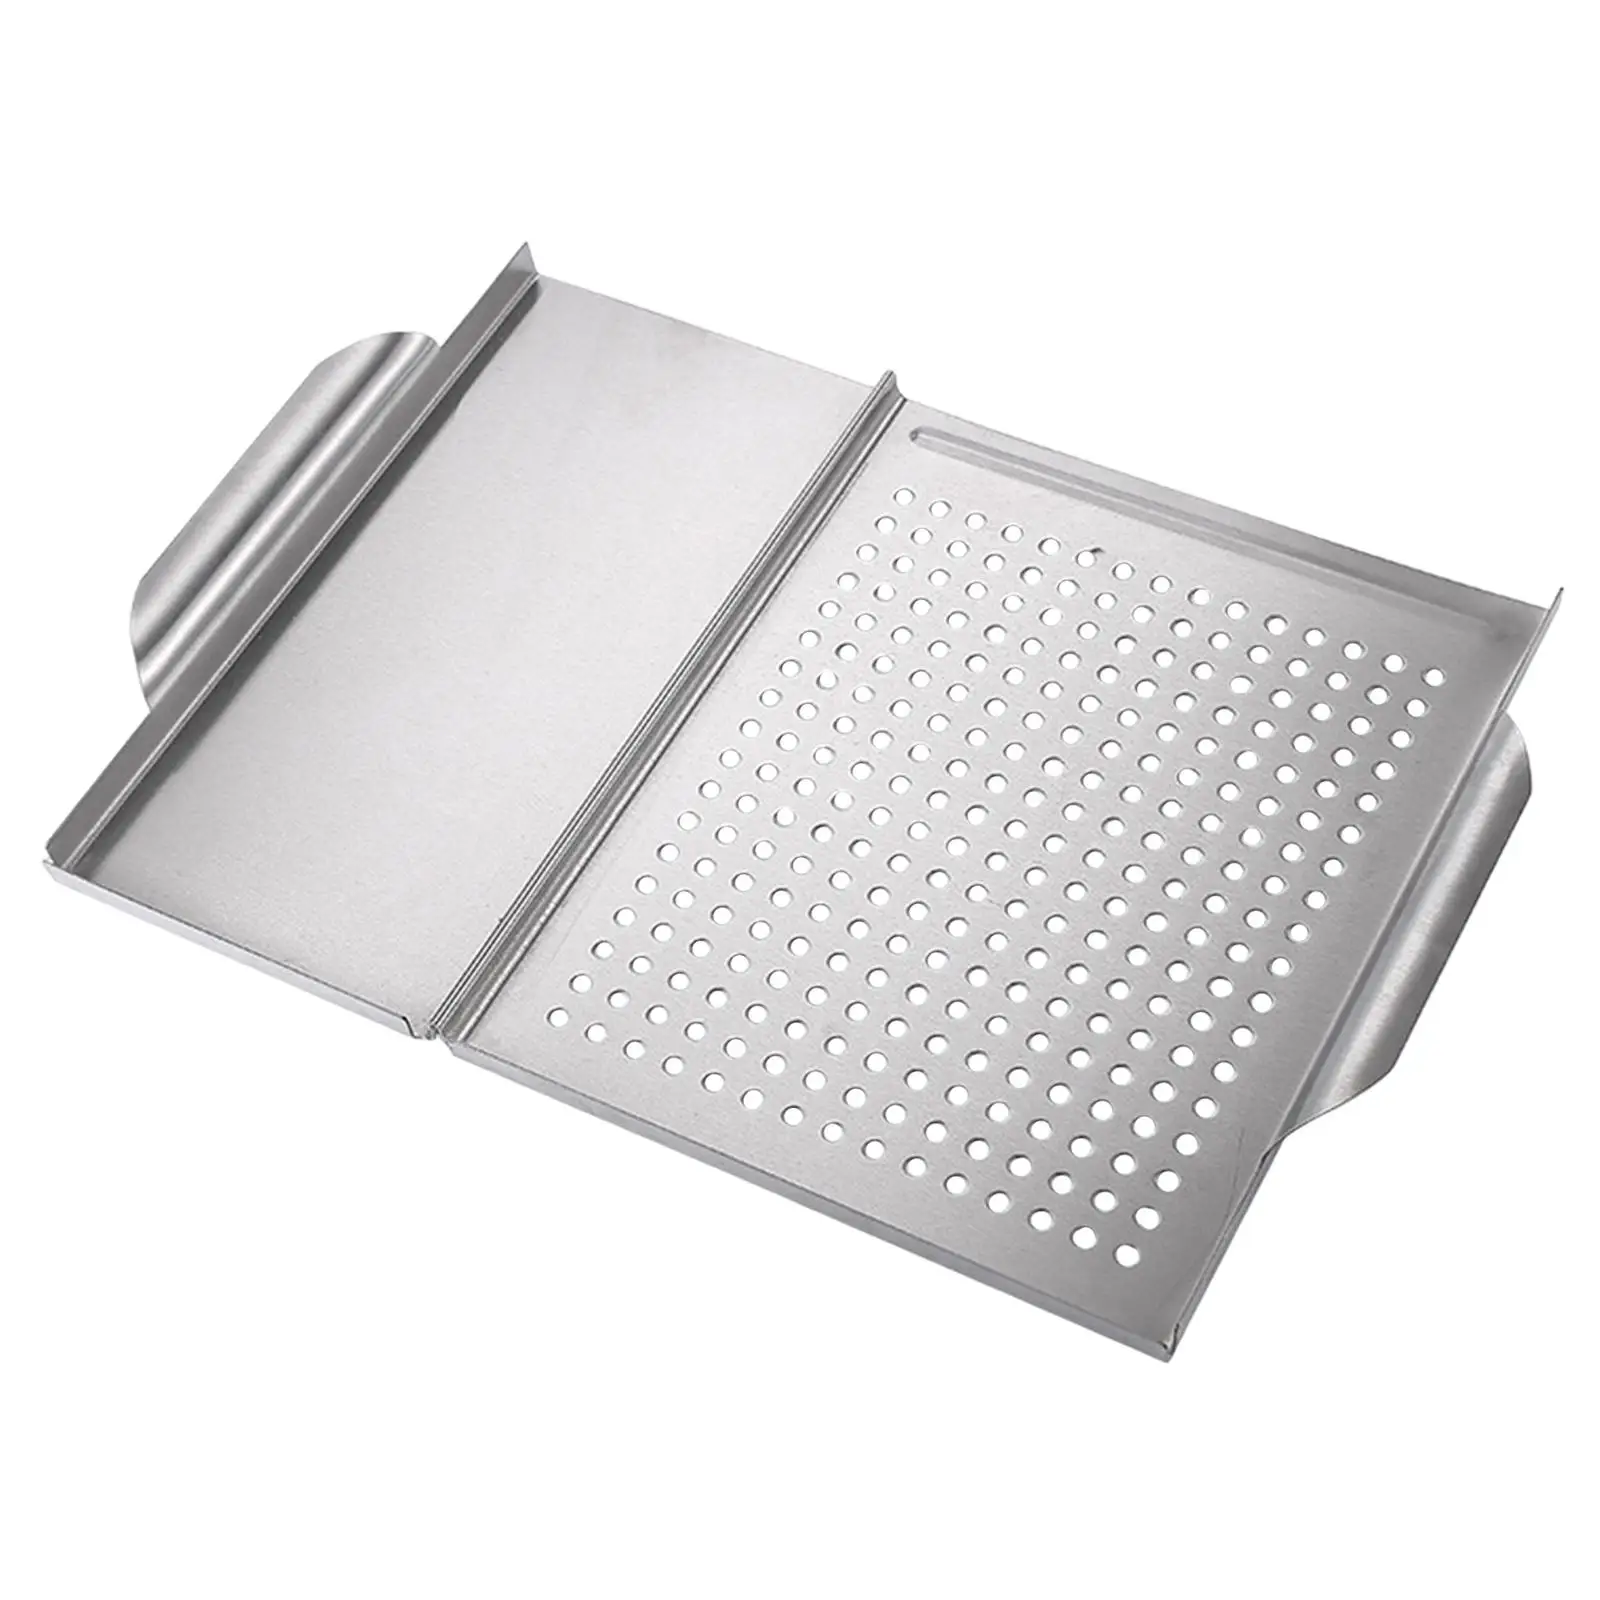 Nonstick Grill Basket with Holes Stainless Steel Grill Topper Grid BBQ Grill Tray for Outdoor Camping Gas Grills Oven Cooking